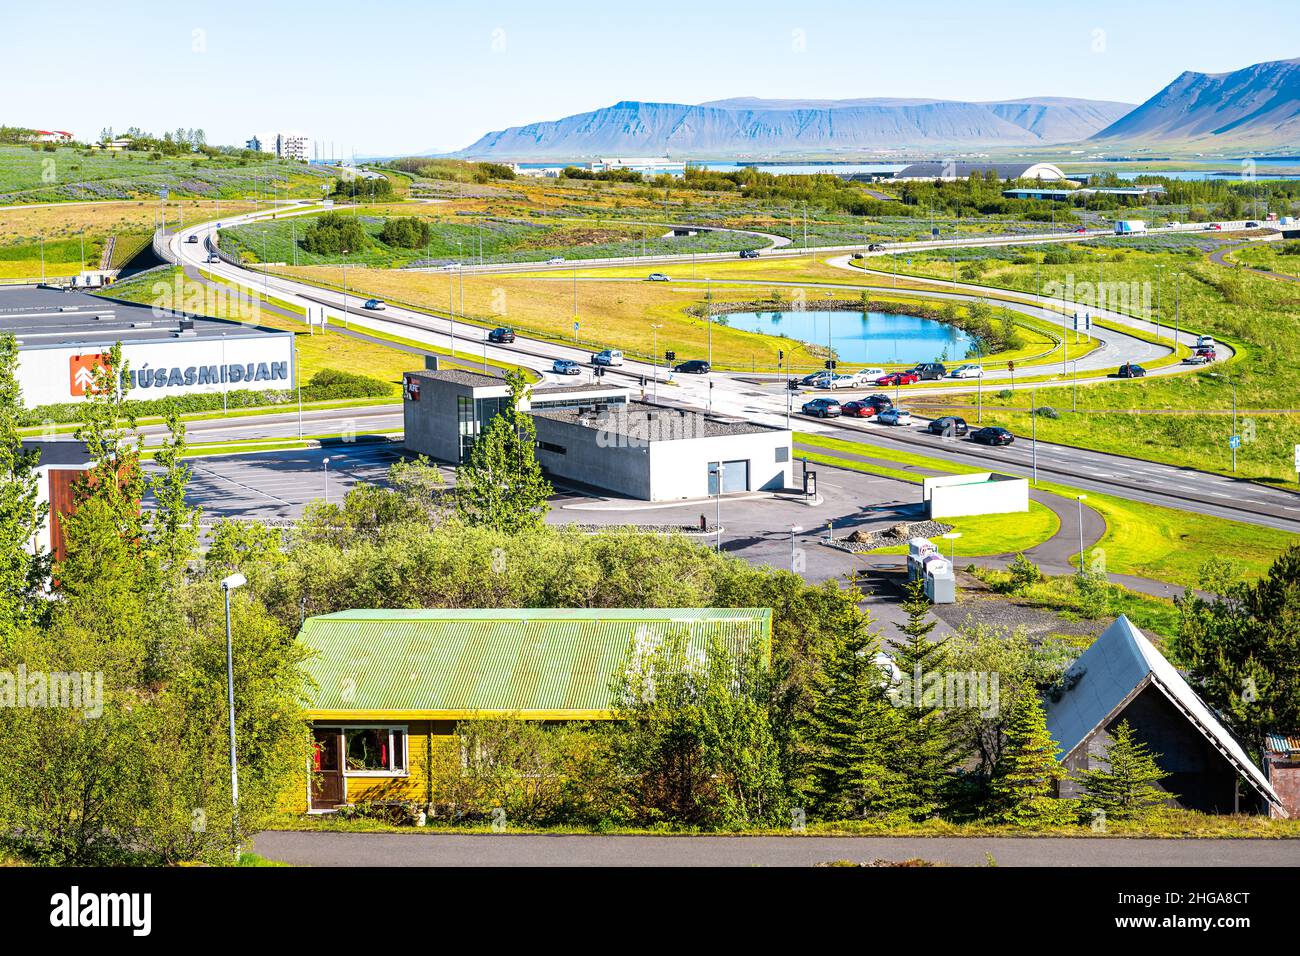 Reykjavik, Iceland - June 20, 2018: Aerial view of Grafarvogur Reykjavik suburbs outskirts buildings of capital city in summer with cars on highway ro Stock Photo